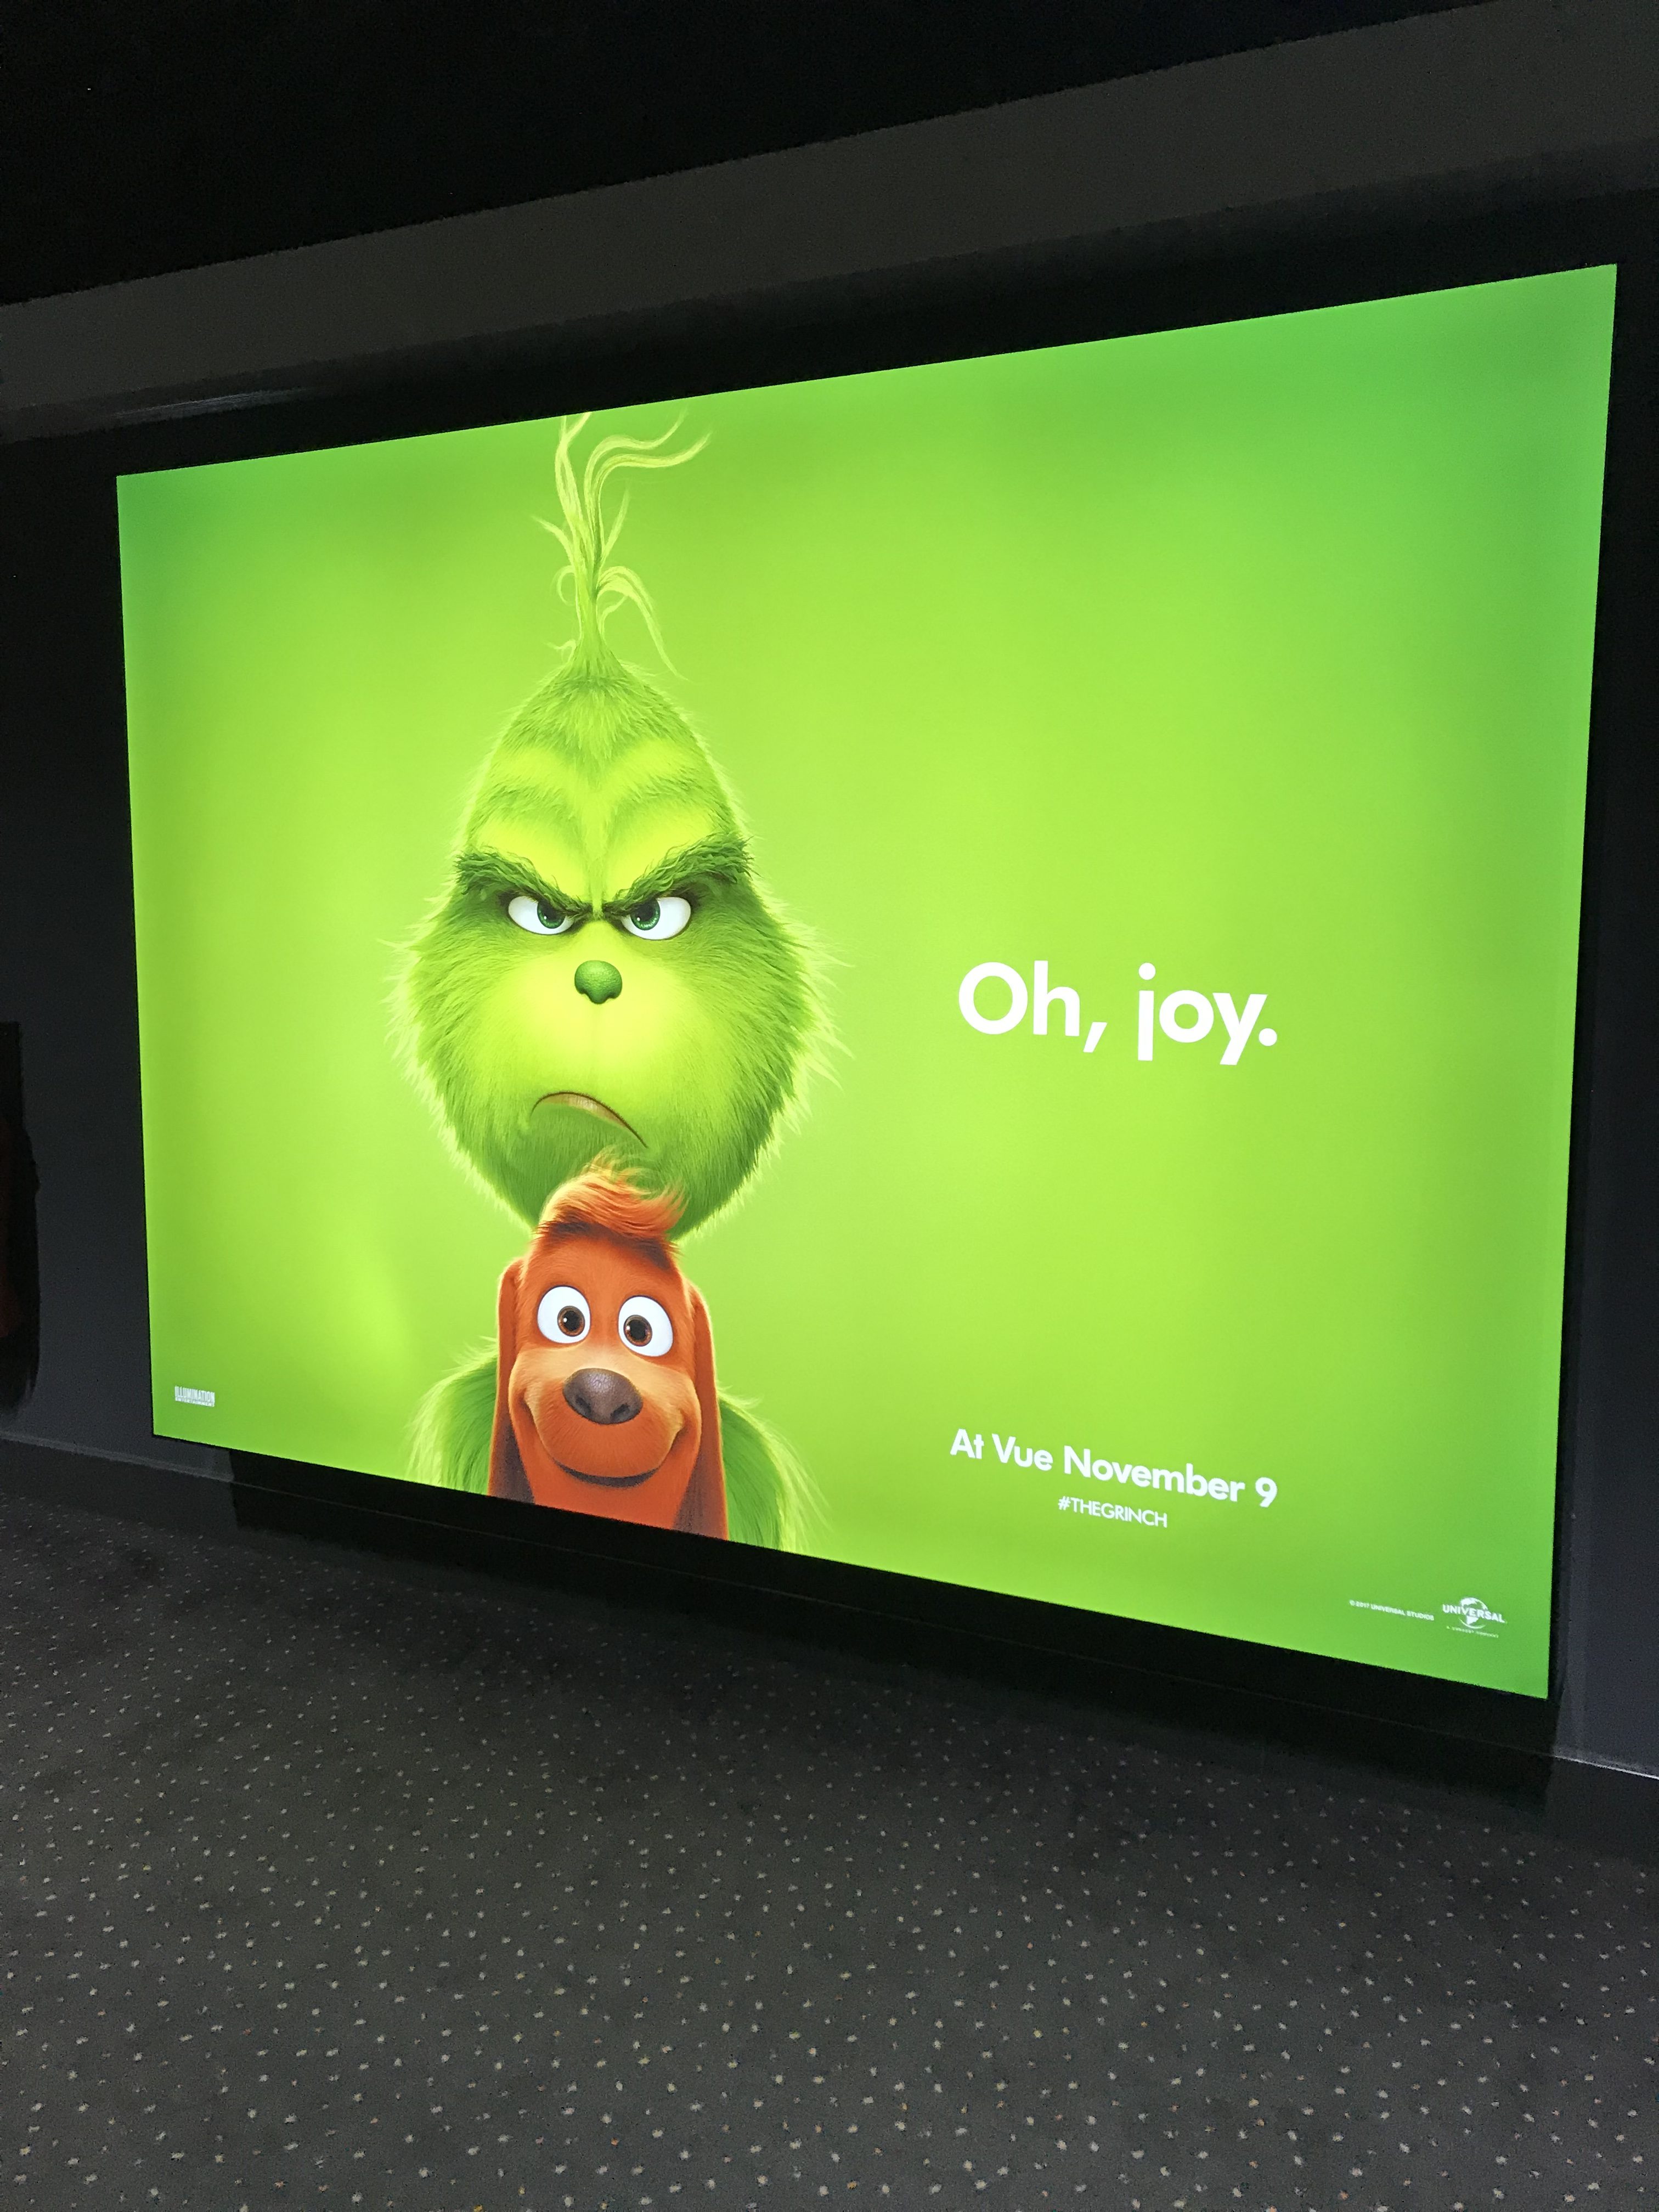 A poster for the Grinch Christmas film. The background is green with a cartoon version of the Grinch, (a green furry creature with an angry expression) holding a brown dog. Next to the Grinch it says 'Oh Joy.'